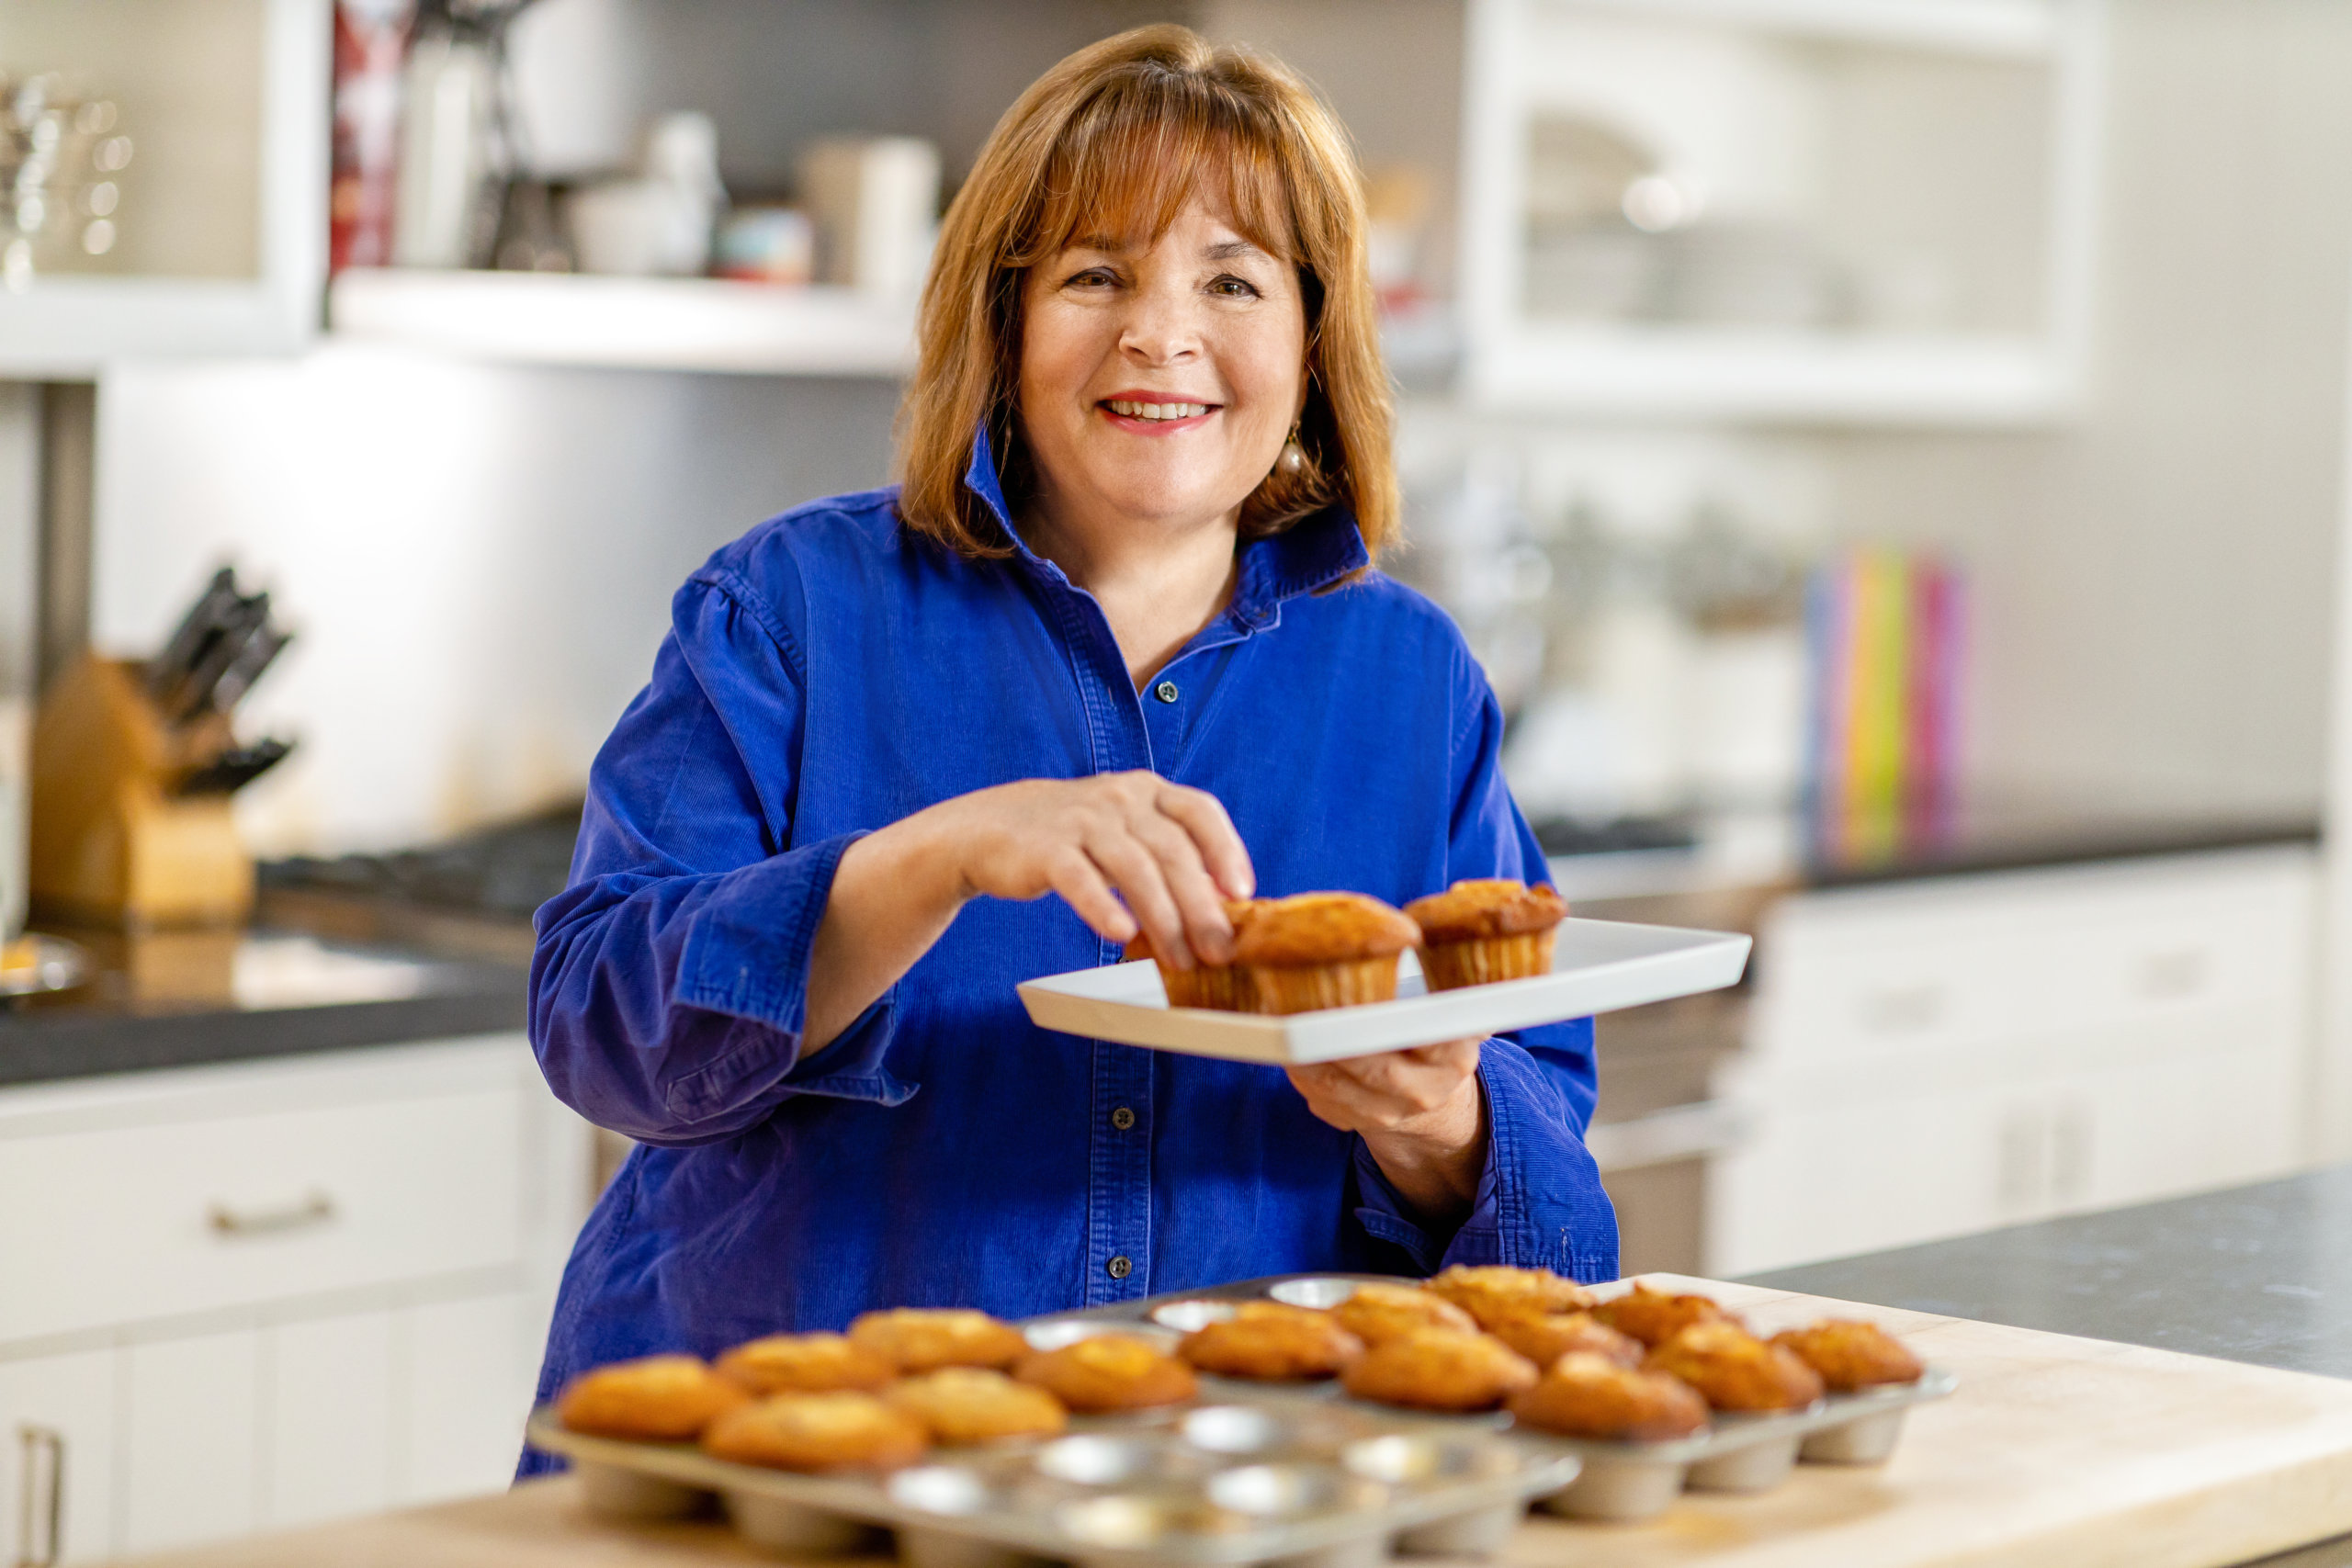 Go-To Dinners author Ina Garten on 